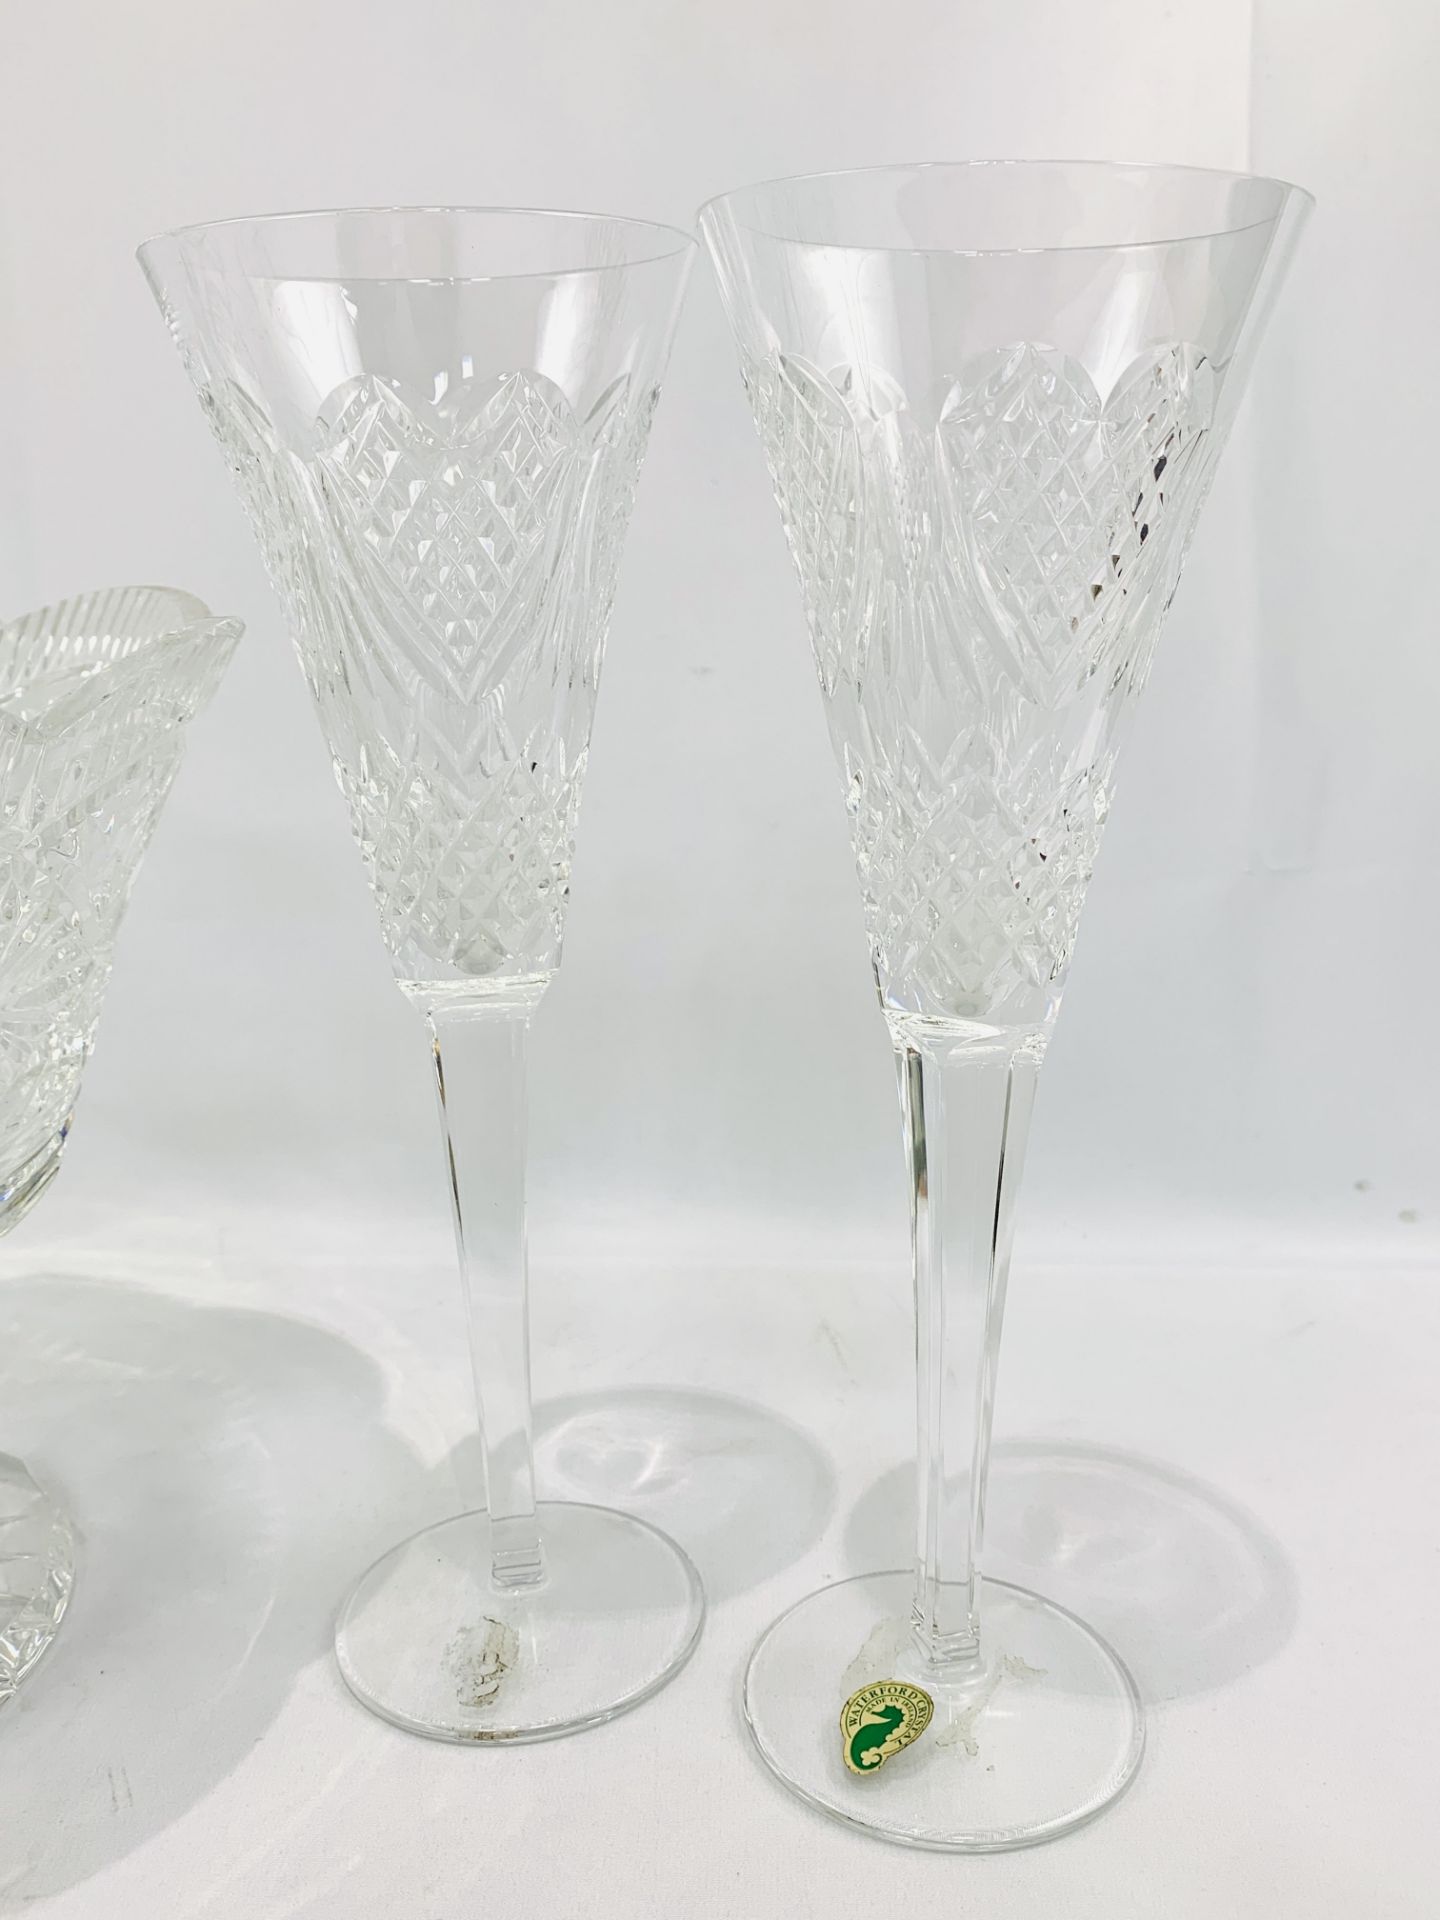 Waterford crystal cut glass fruit bowl and 2 Waterford crystal flutes - Image 2 of 5